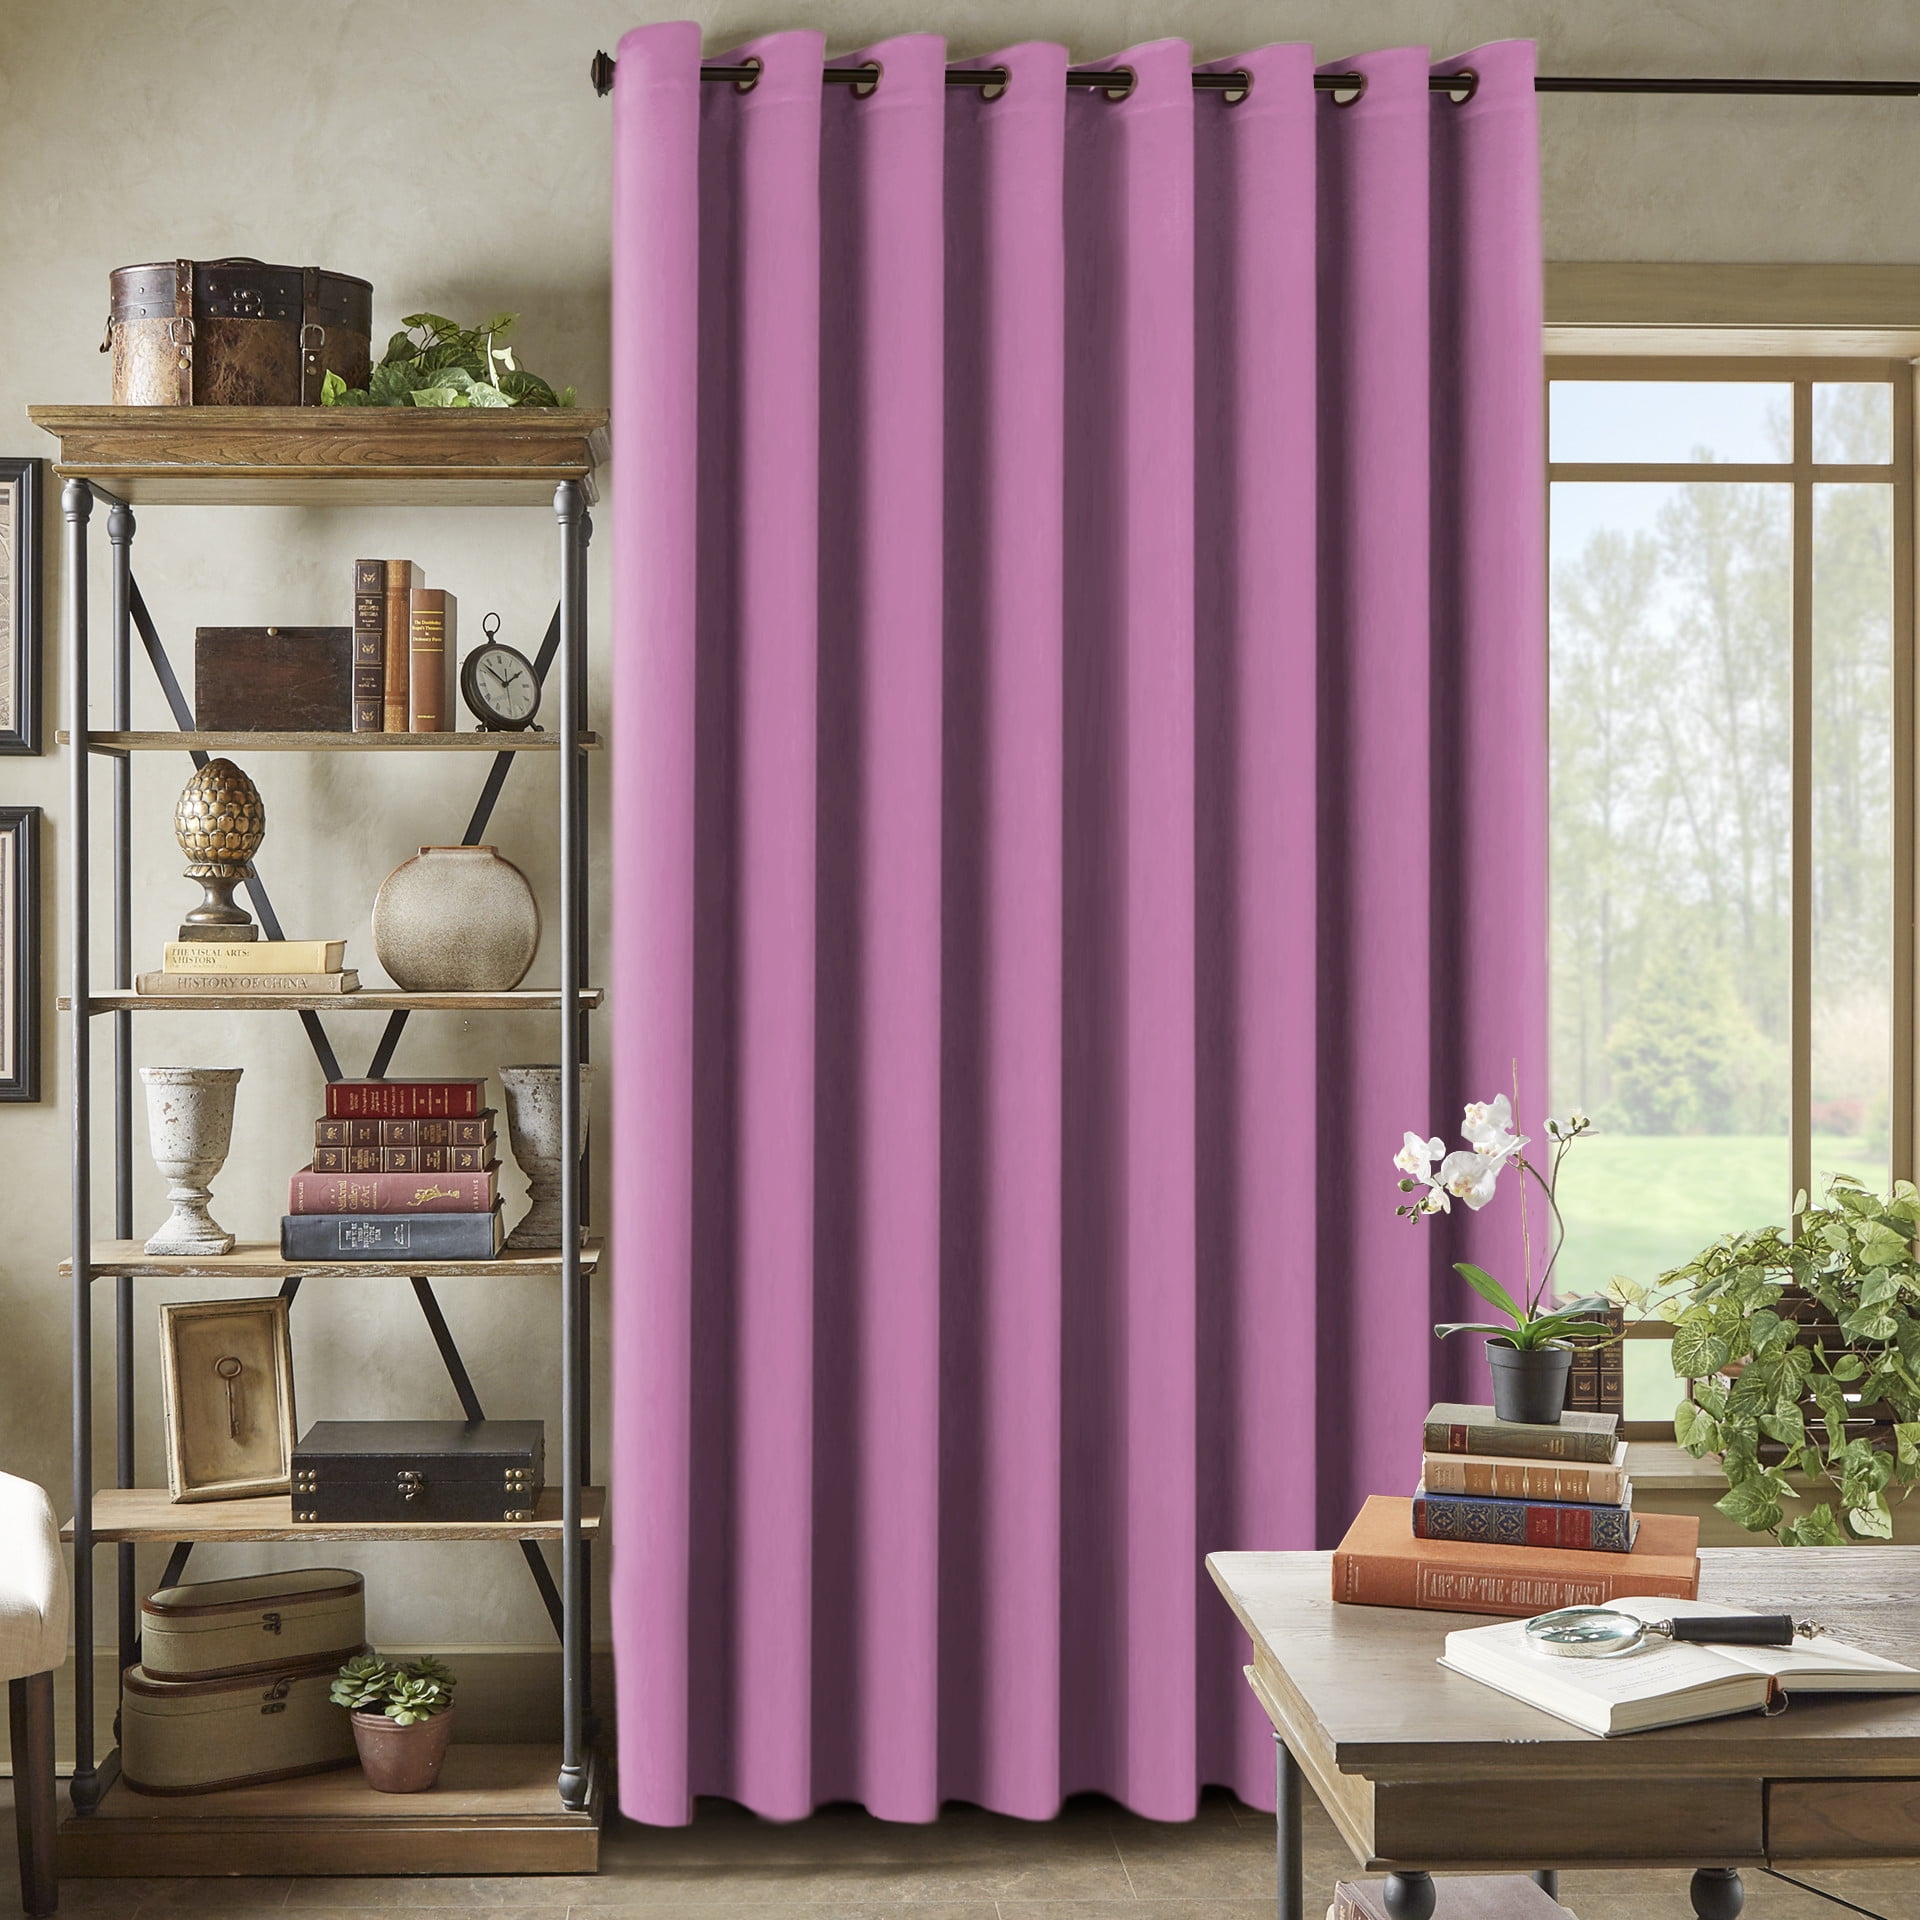 H.Versailtex Extra Long And Wide Blackout Curtains, Thermal Insulated